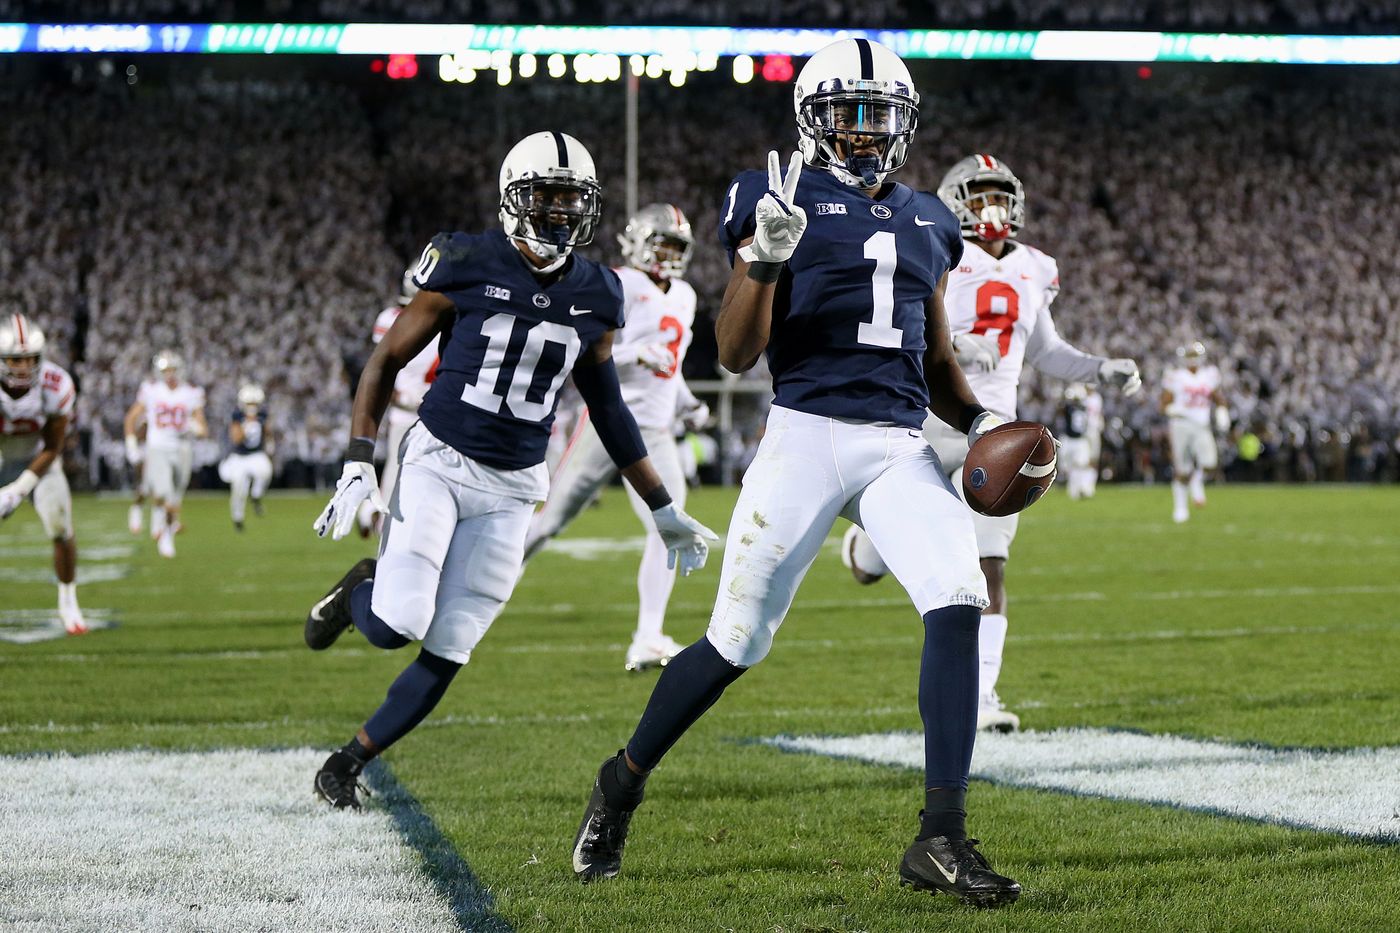 Penn State stunned by Ohio States late surge in Big Ten rivalry loss at Beaver Stadium